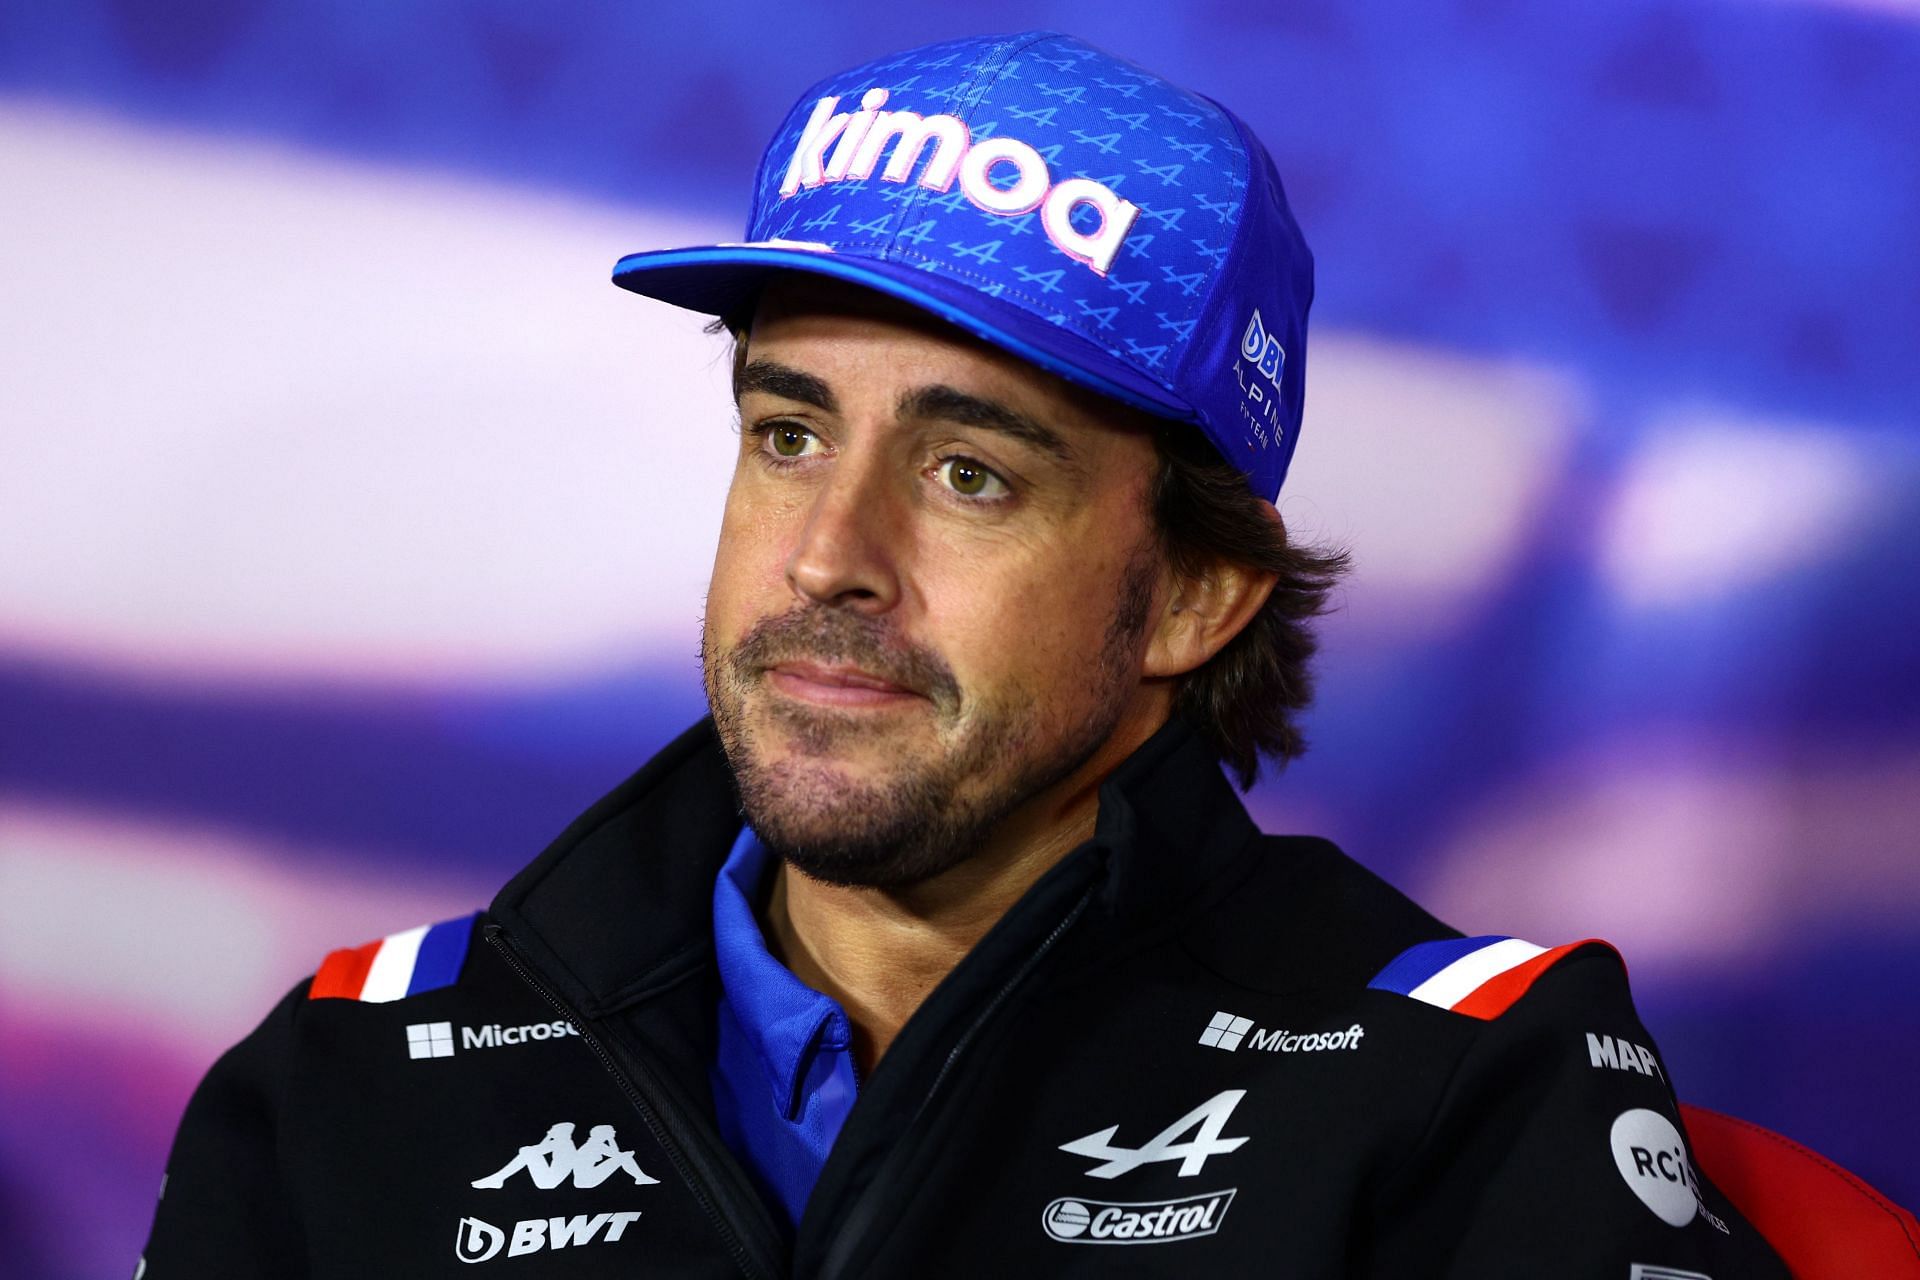 Fernando Alonso is a two-time F1 world champion.